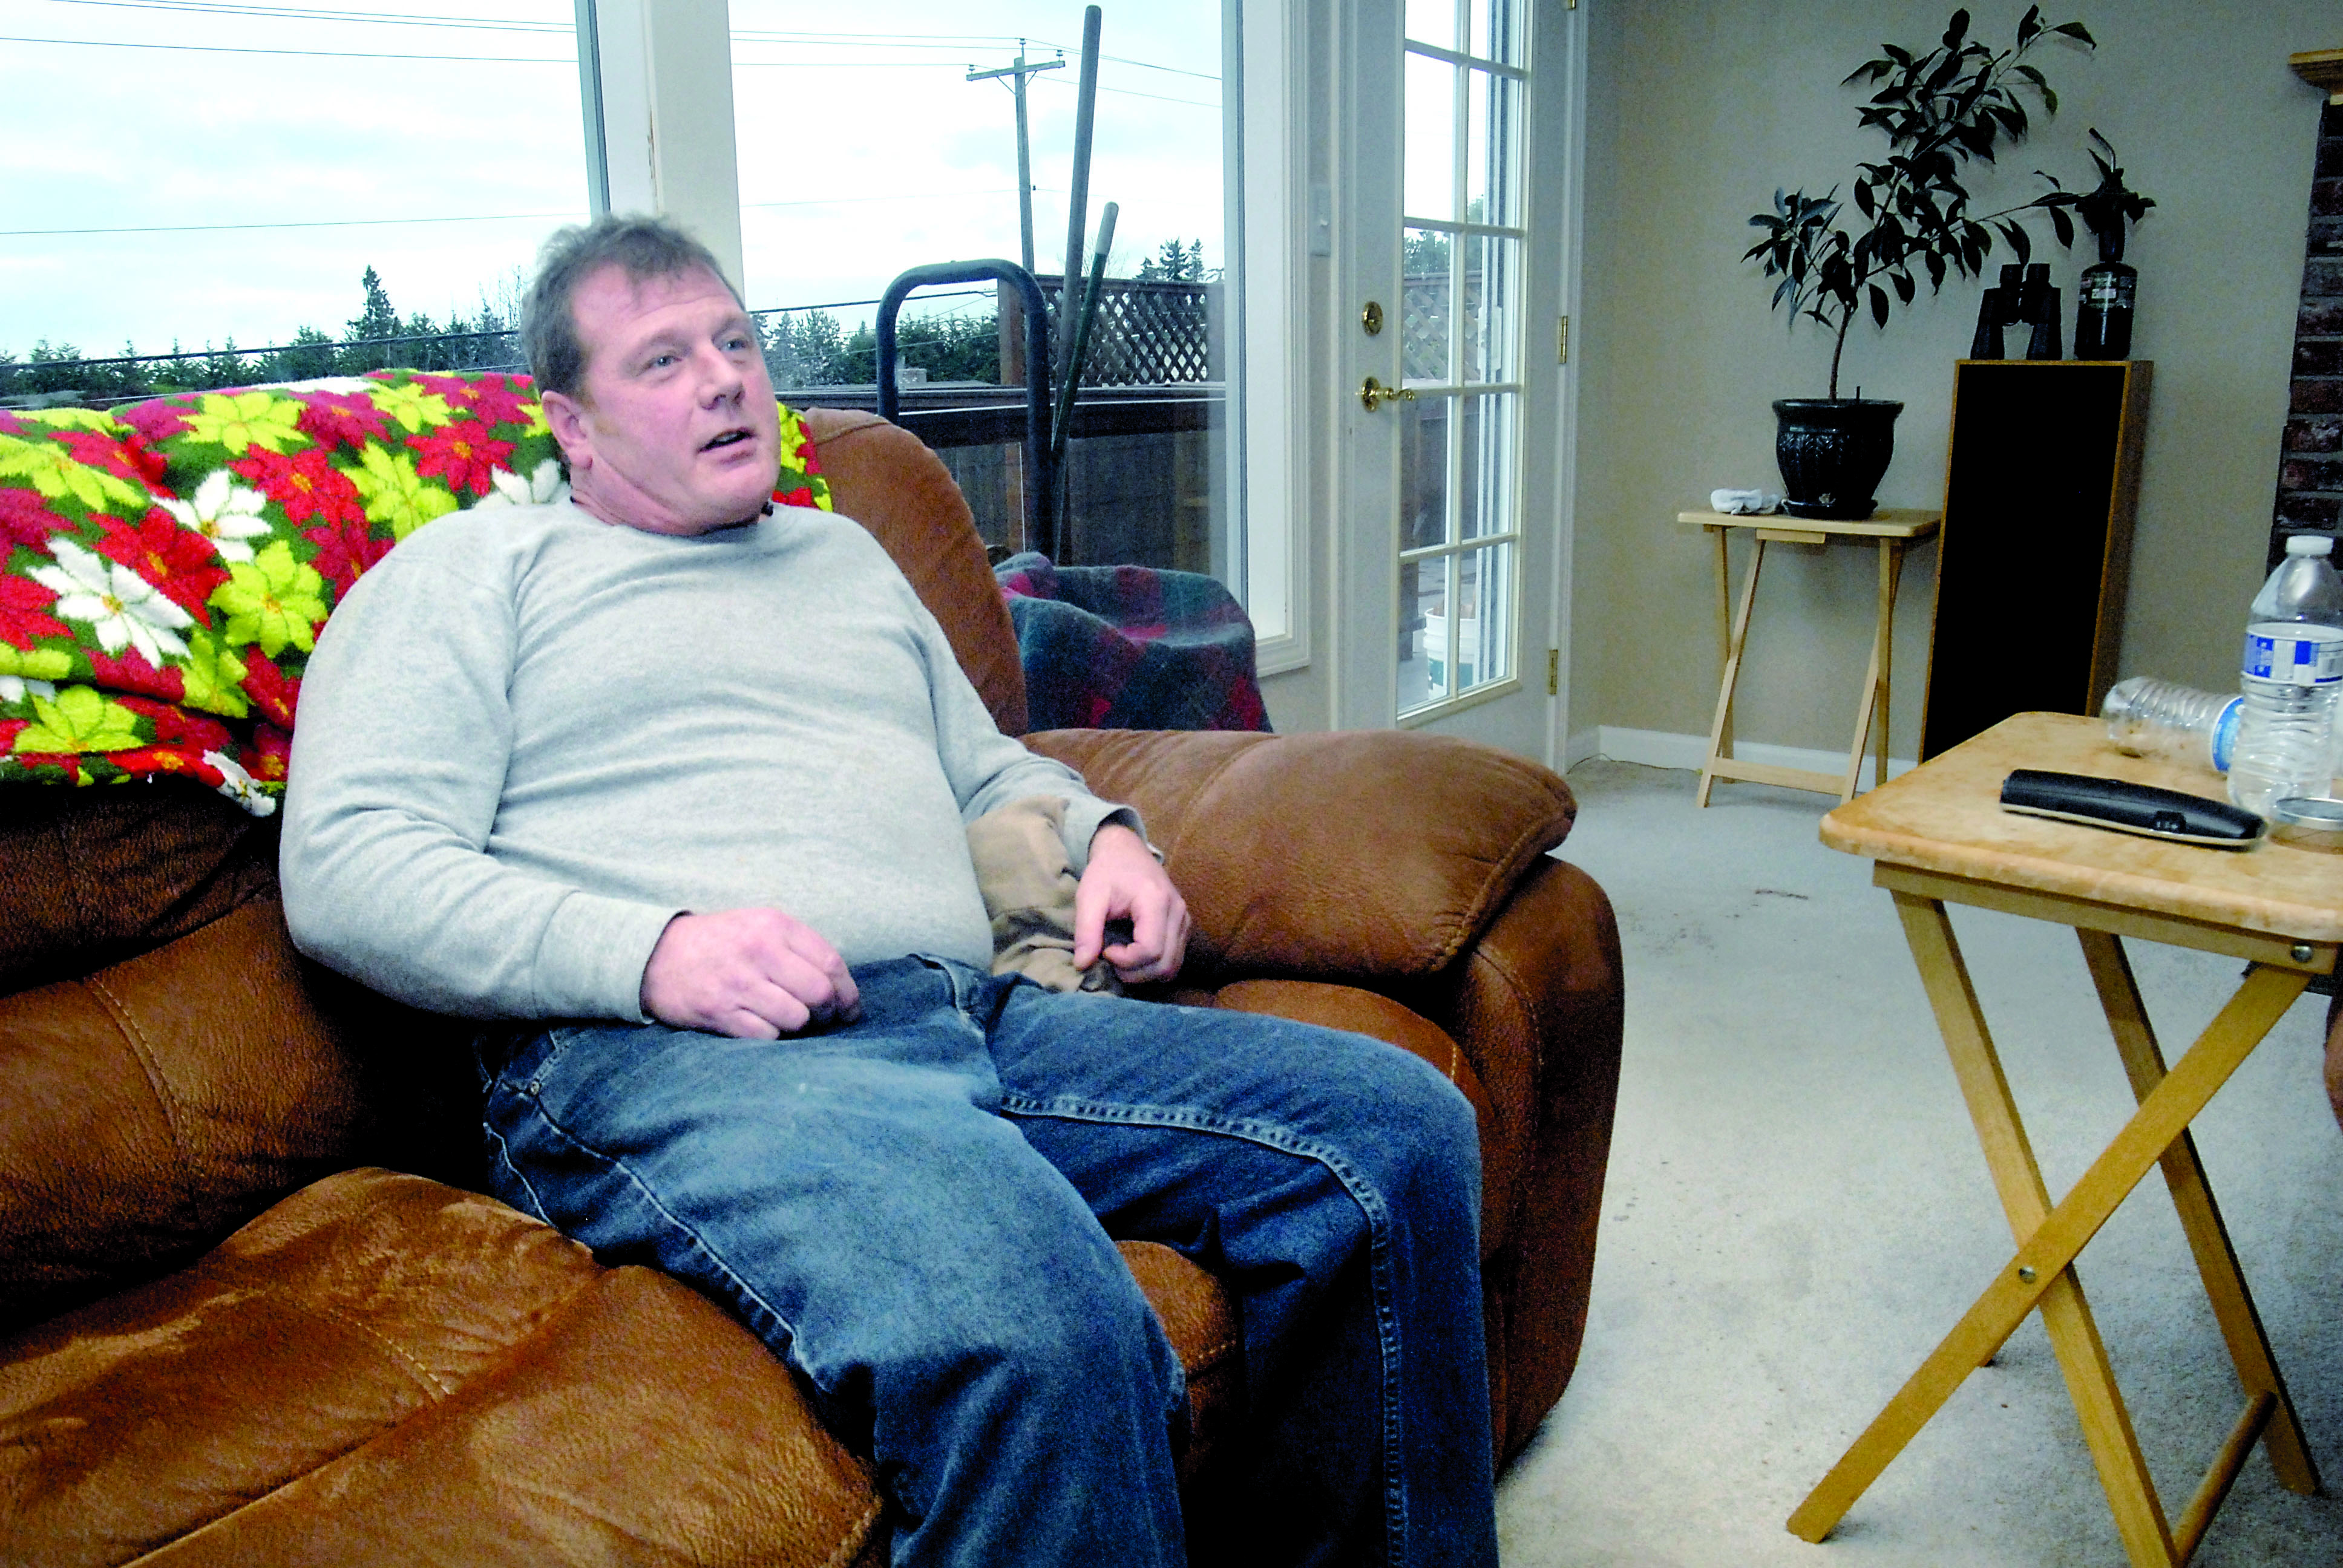 Eric Edmiston sits on the couch of his Port Angeles home near the door where a Port Angeles police dog attacked him. (Keith Thorpe/Peninsula Daily News)